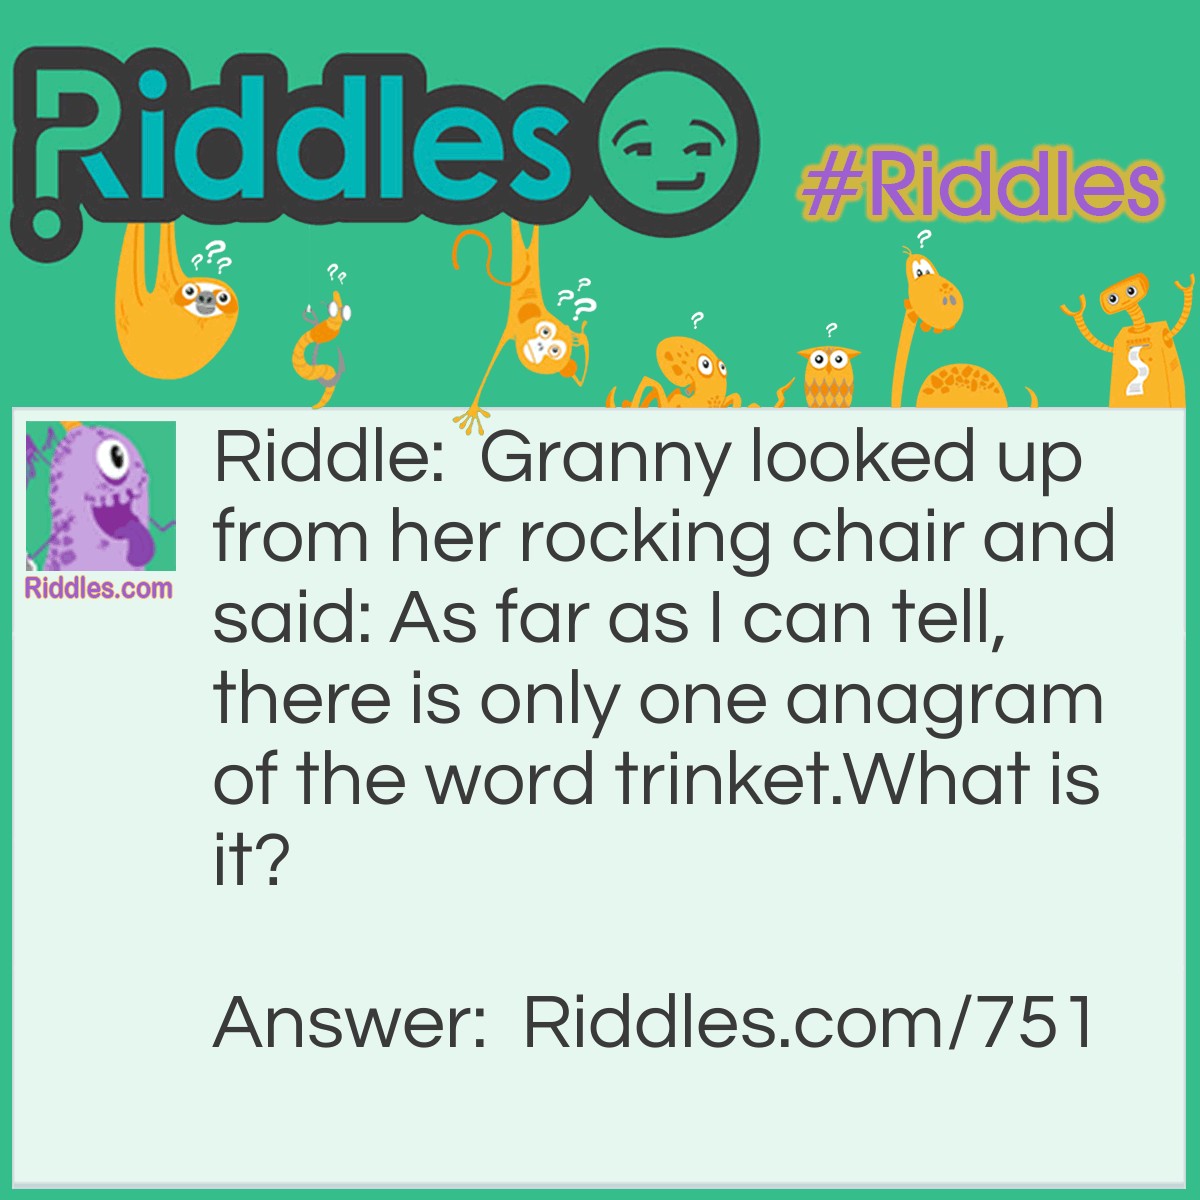 Riddle: Granny looked up from her rocking chair and said: As far as I can tell, there is only one anagram of the word trinket.
What is it? Answer: The word knitter.